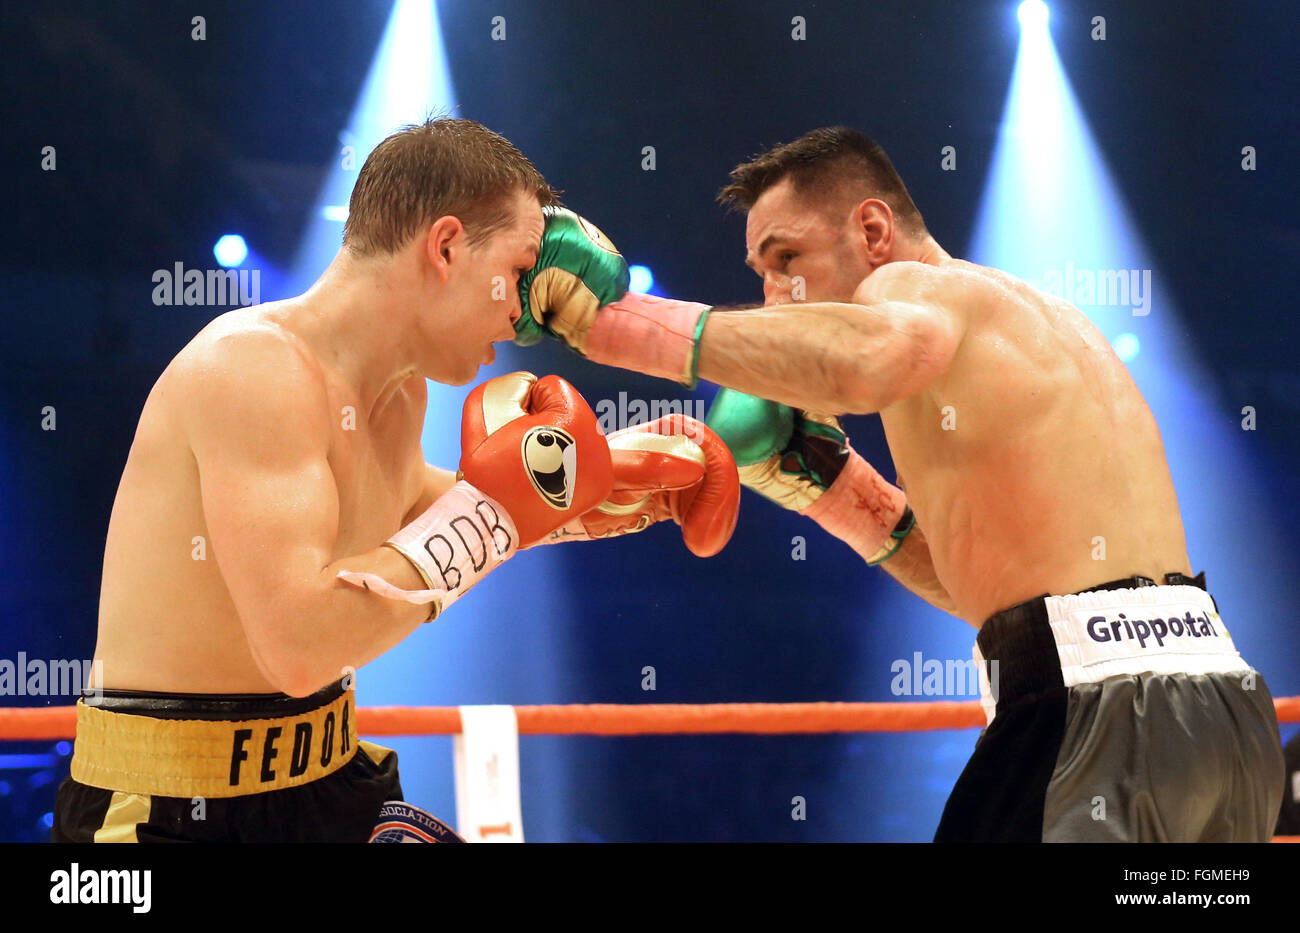 Oberhausen, Germany. 20th Feb, 2016. Feder Chudinov (Russia, l) in action against Felix Sturm (Germany, r) during the Super Middleweight fight at the WBA Super World Cup in Oberhausen, Germany, 20 February 2016. Felix Sturm wins back the Super Middleweight World Champion title. Photo: Roland Weihrauch/dpa/Alamy Live News Stock Photo